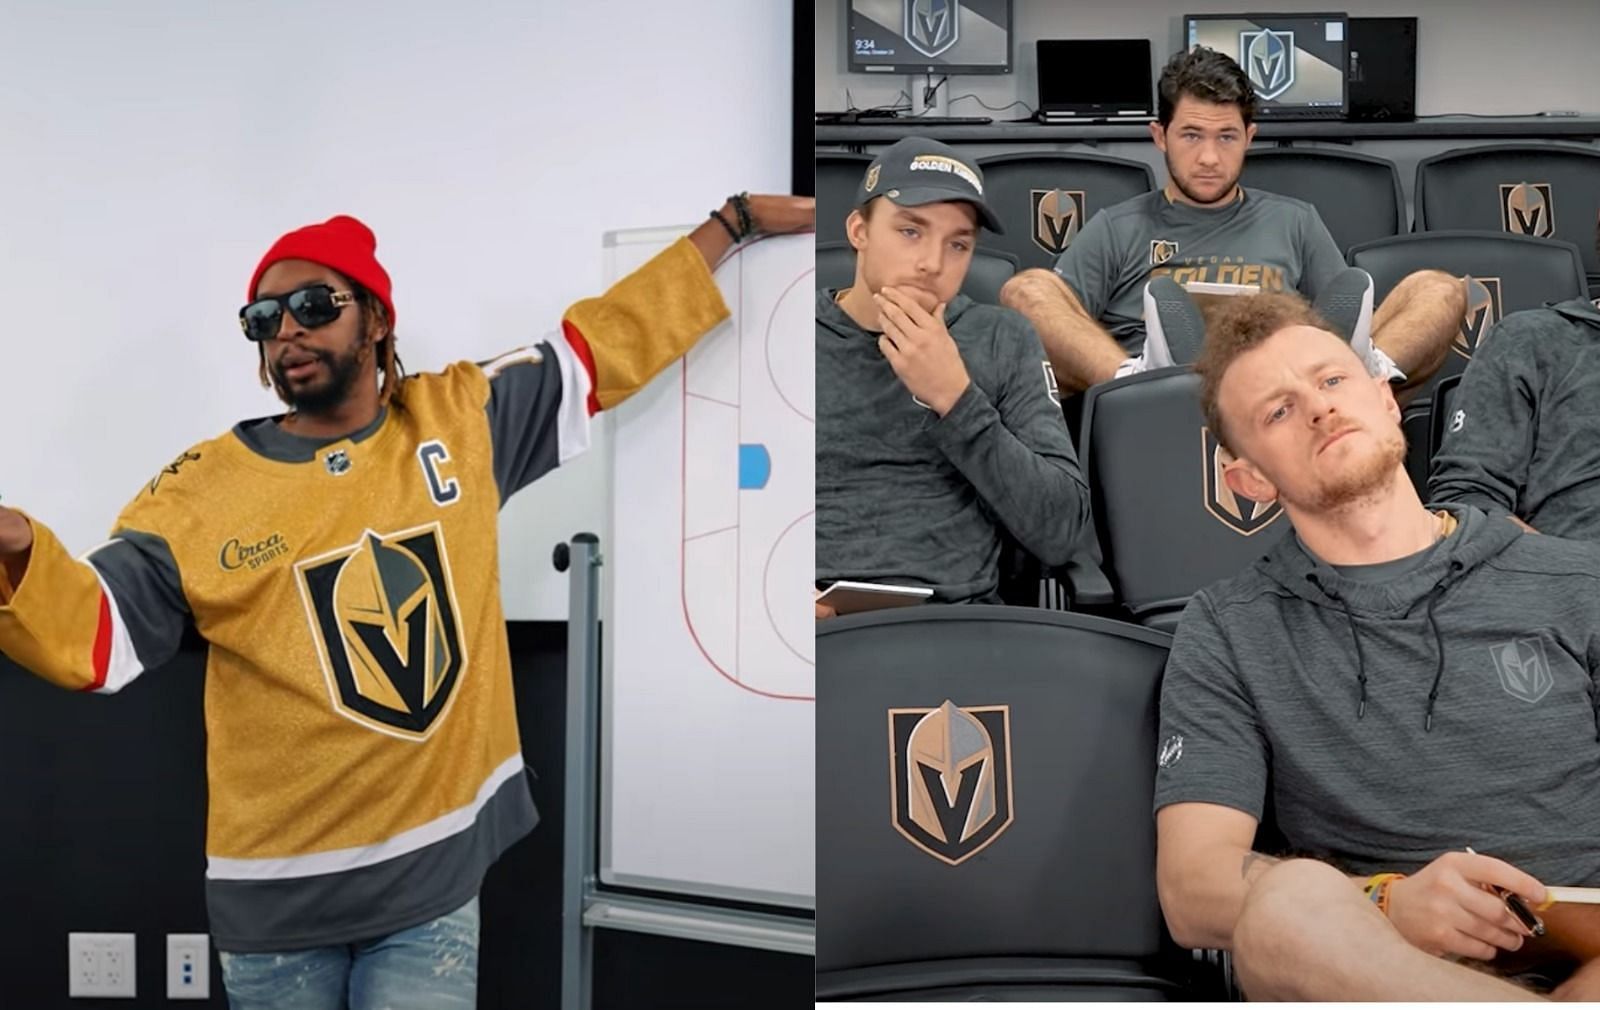 When Lil Jon drew up plays for Vegas Golden Knights players to take a lot of 